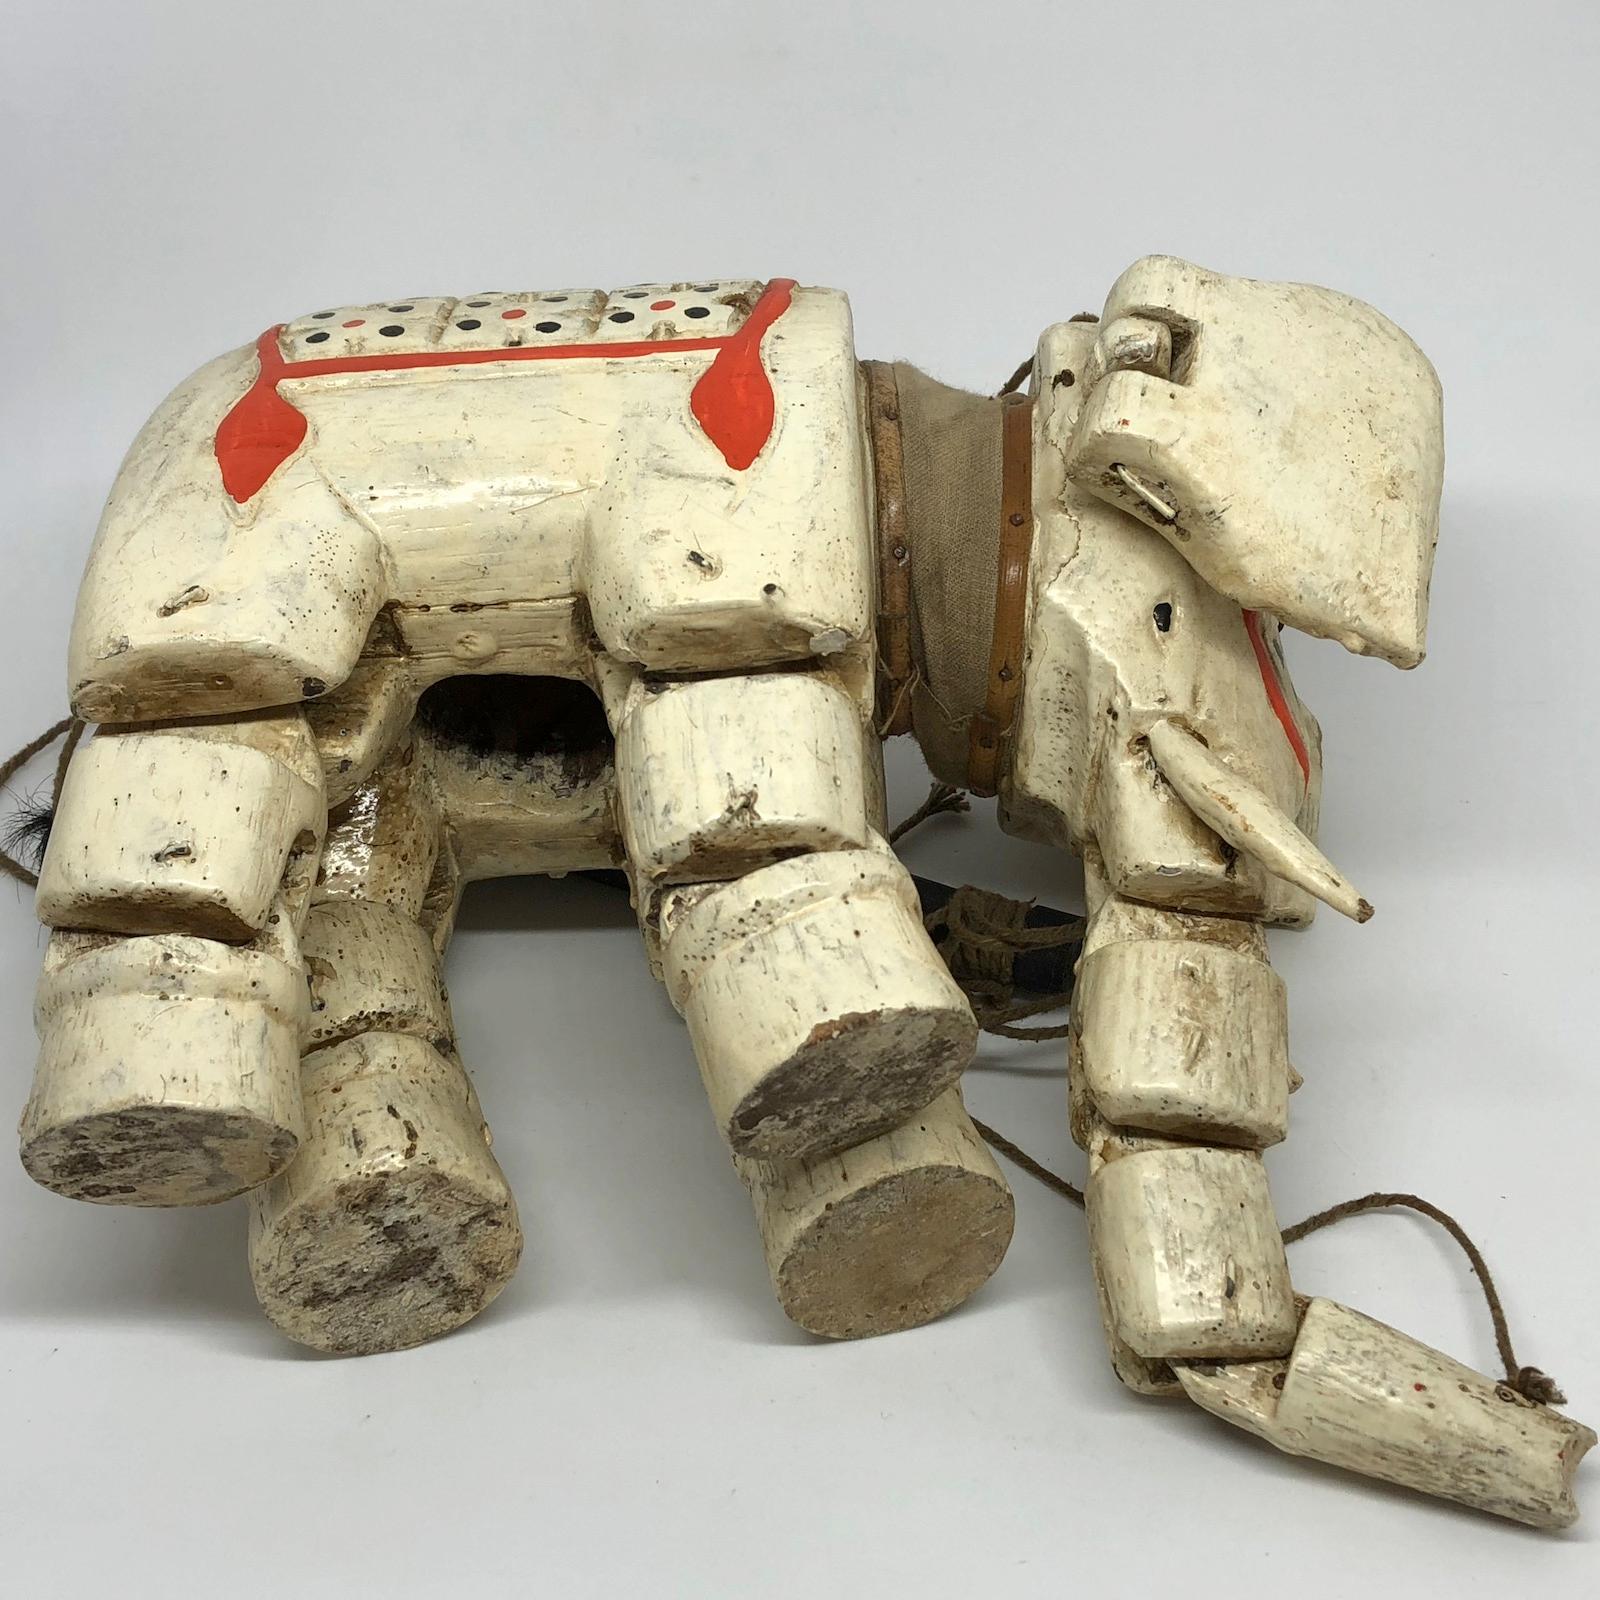 Hand-Carved Handcrafted Vintage Marionette Puppet on a String Elephant, India, 1930s